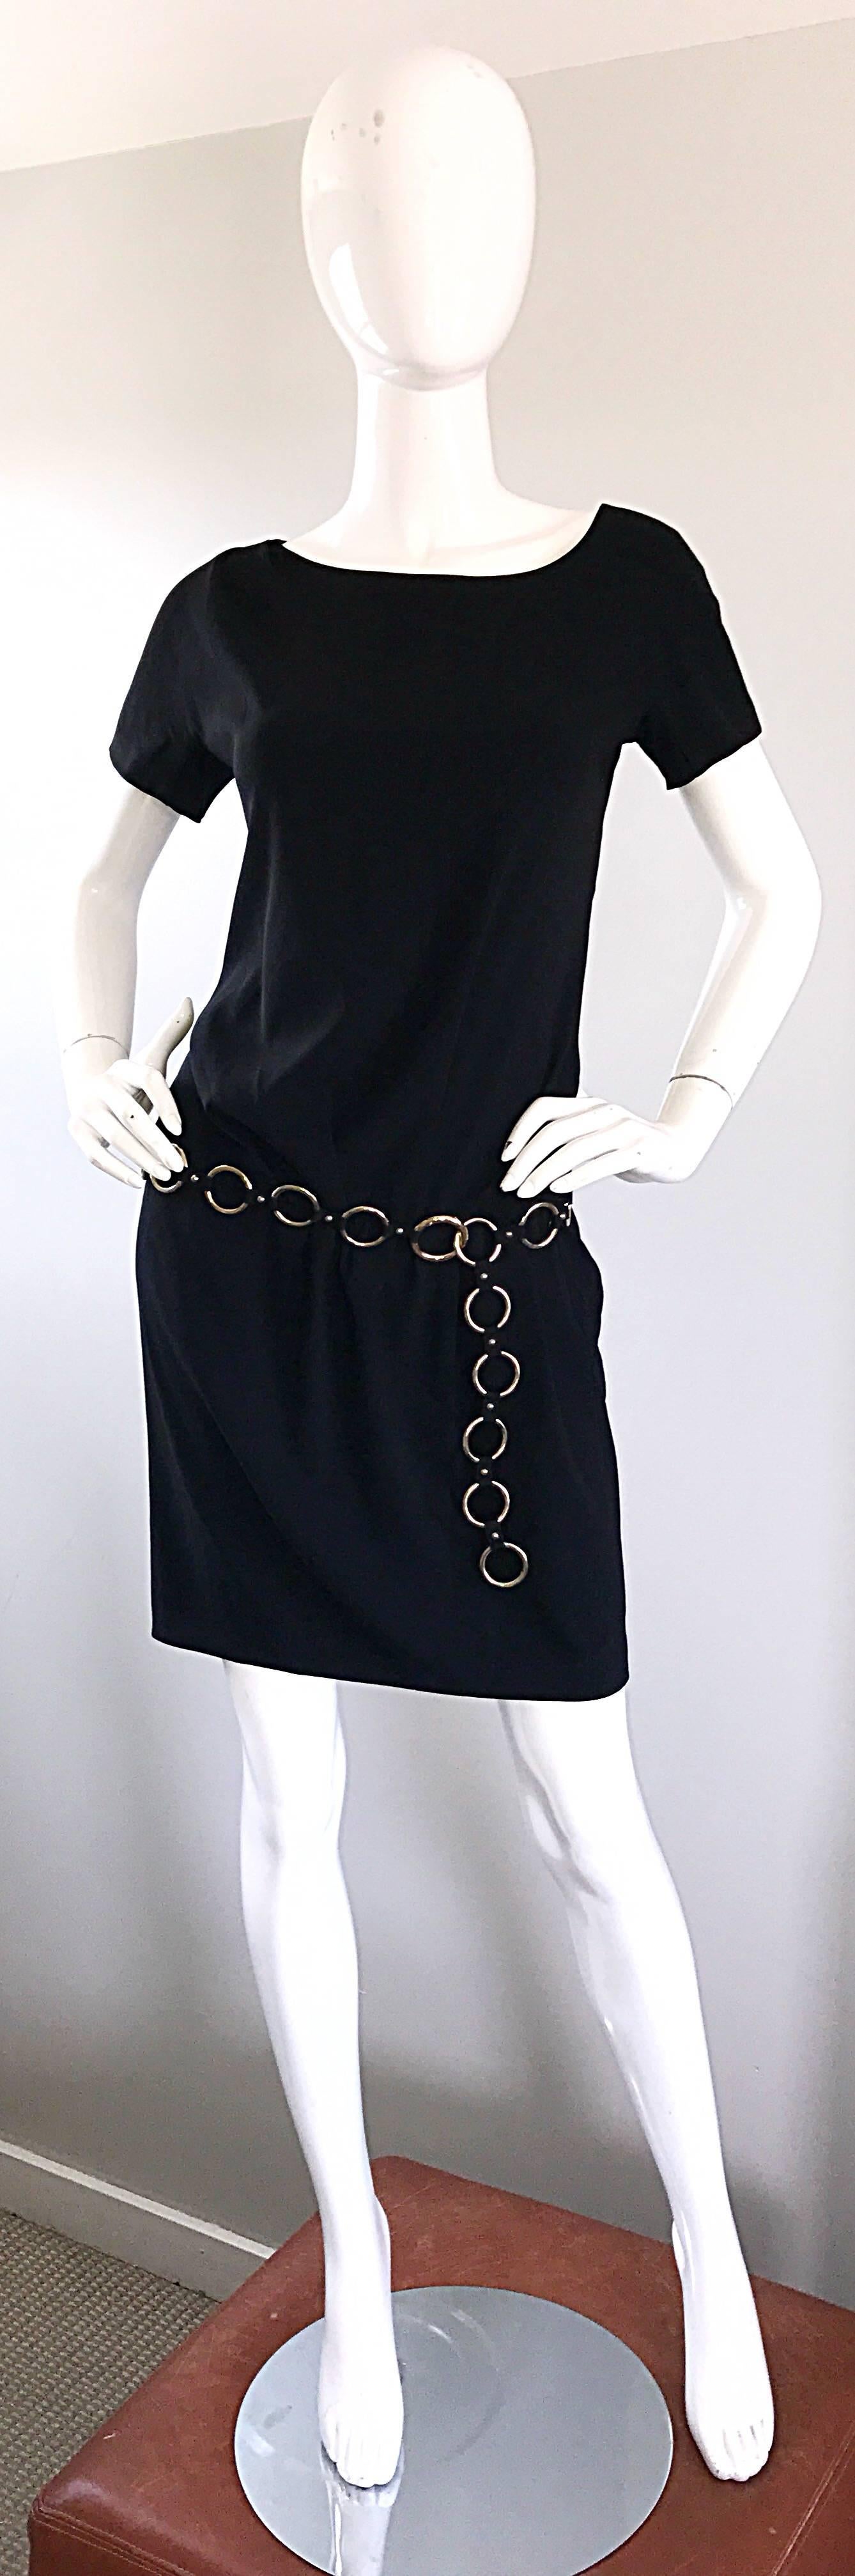 Fantastic vintage 90s MOSCHINO CHEAP & CHIC black dress, with attached silver loop link belt! Intricate detail, with flattering drapes and gathers throughout. Attached belt can be adjusted to fit. Hidden zipper up the side with hidden snap closures.